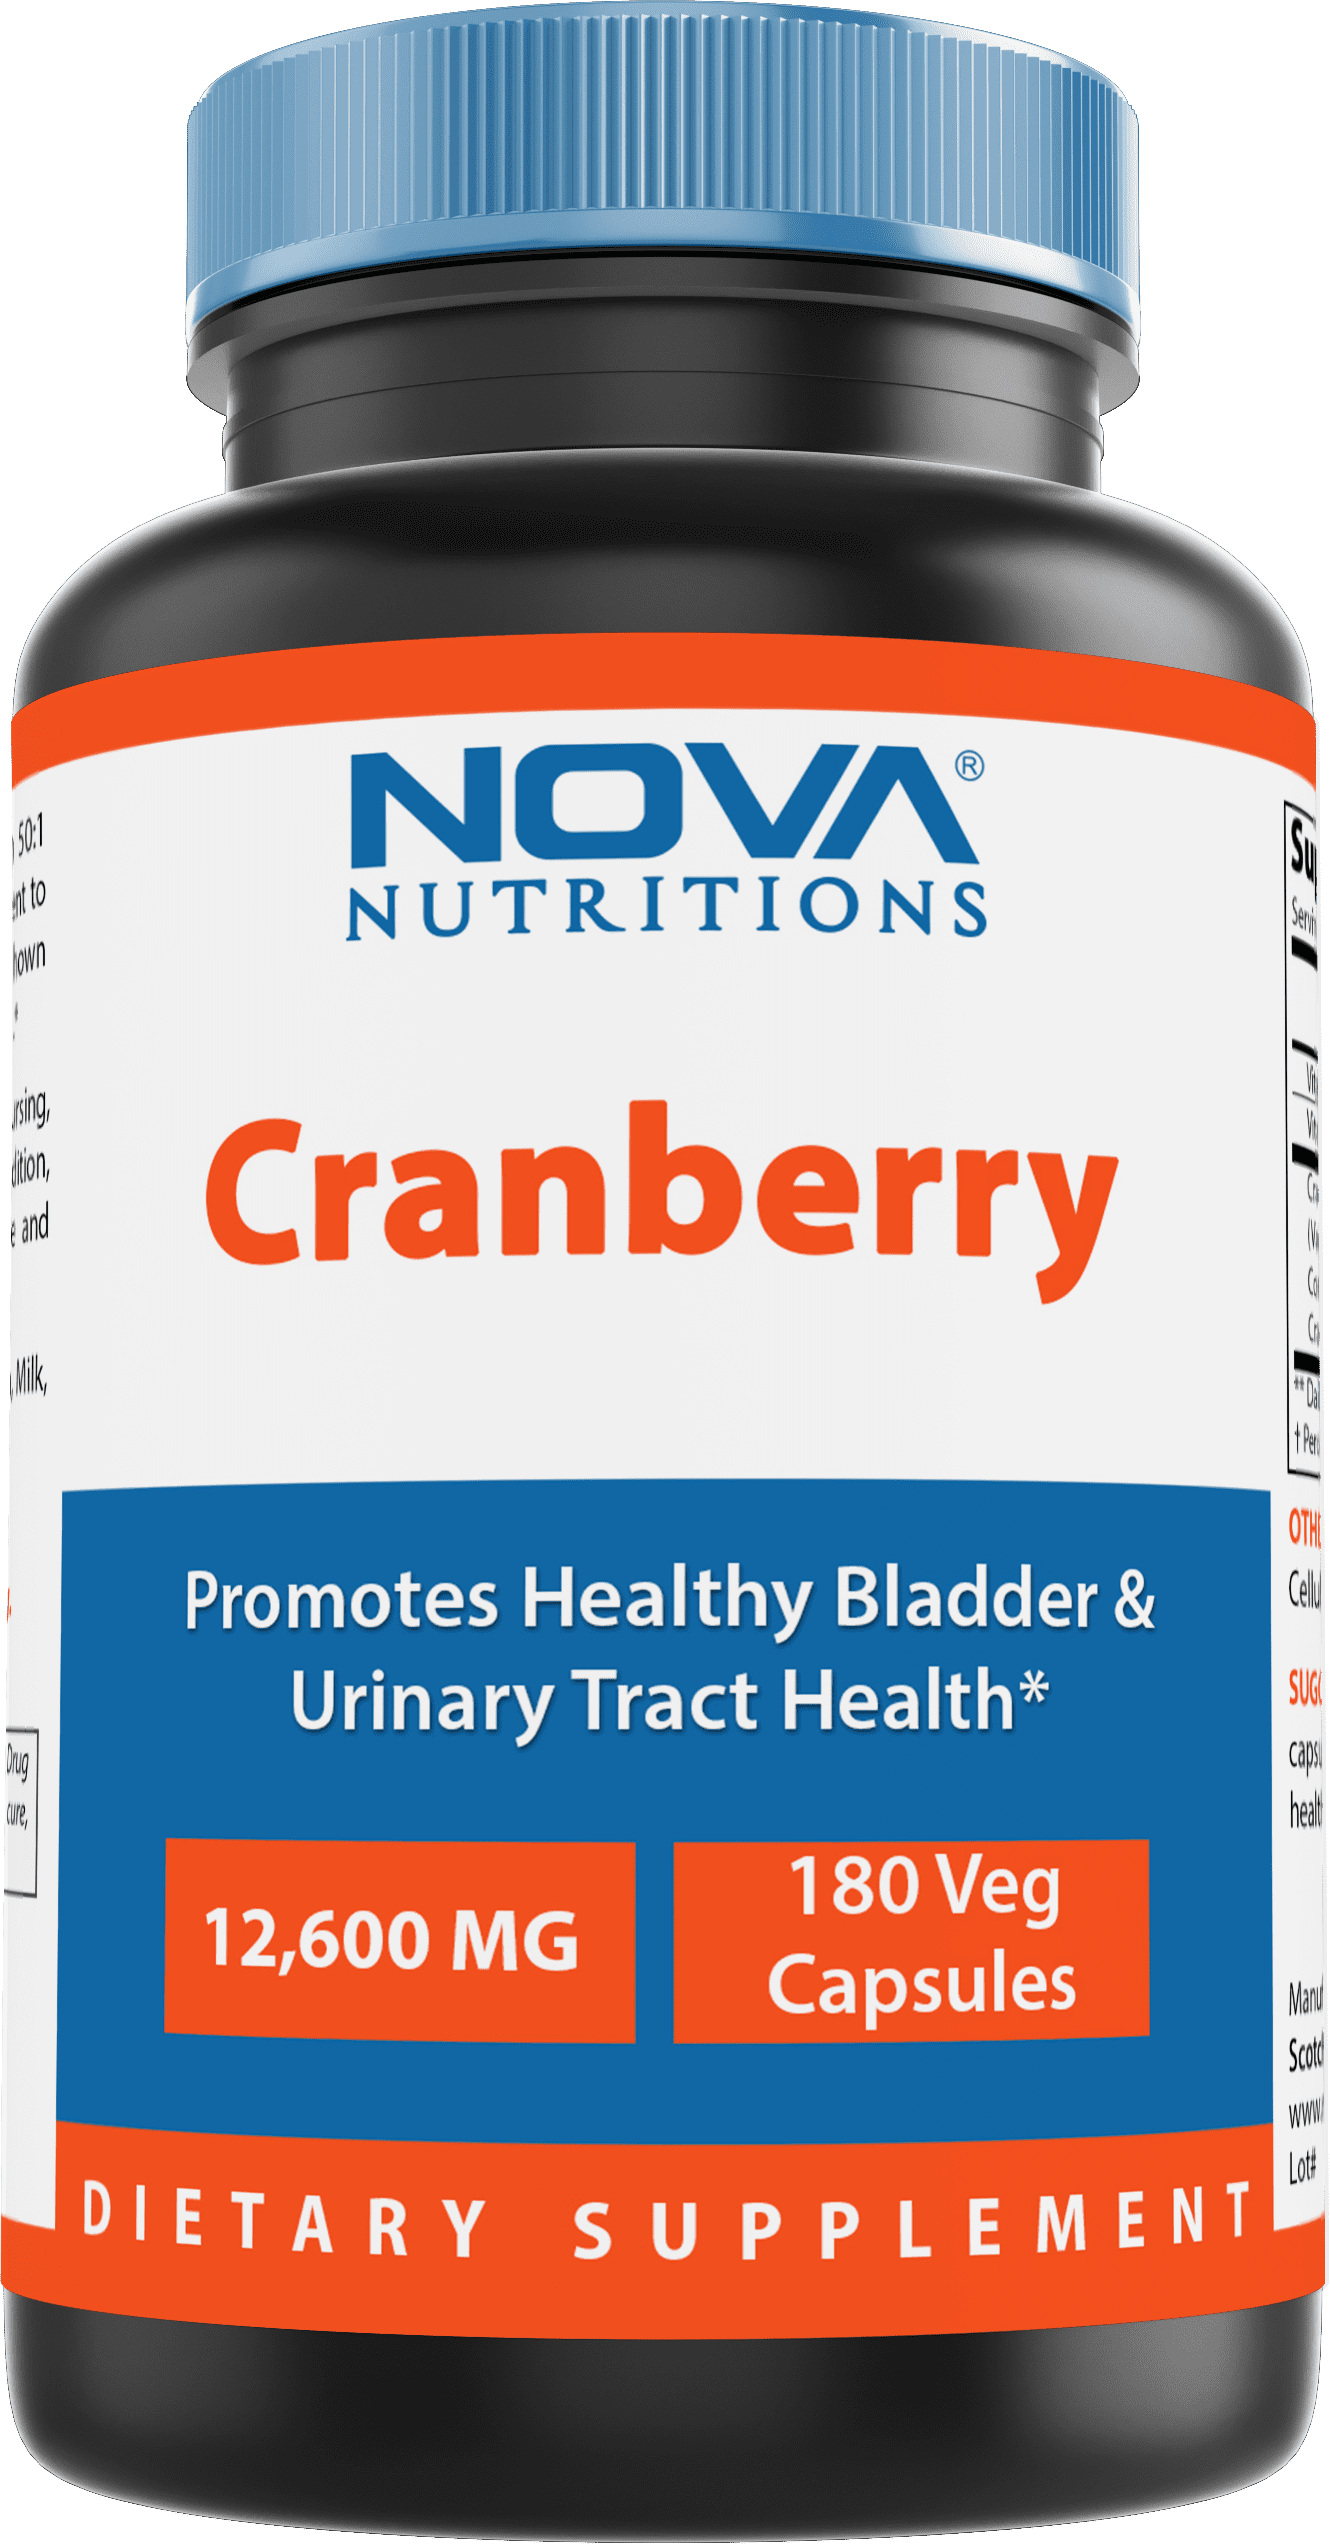 Nova Nutritions Cranberry Urinary Tract Health Dietary Supplement, 12600mg Vegetarian Cranberry Pills with Vitamin C & Vitamin E, Helps Cleanse & Protect The Urinary Tract, 180 Count